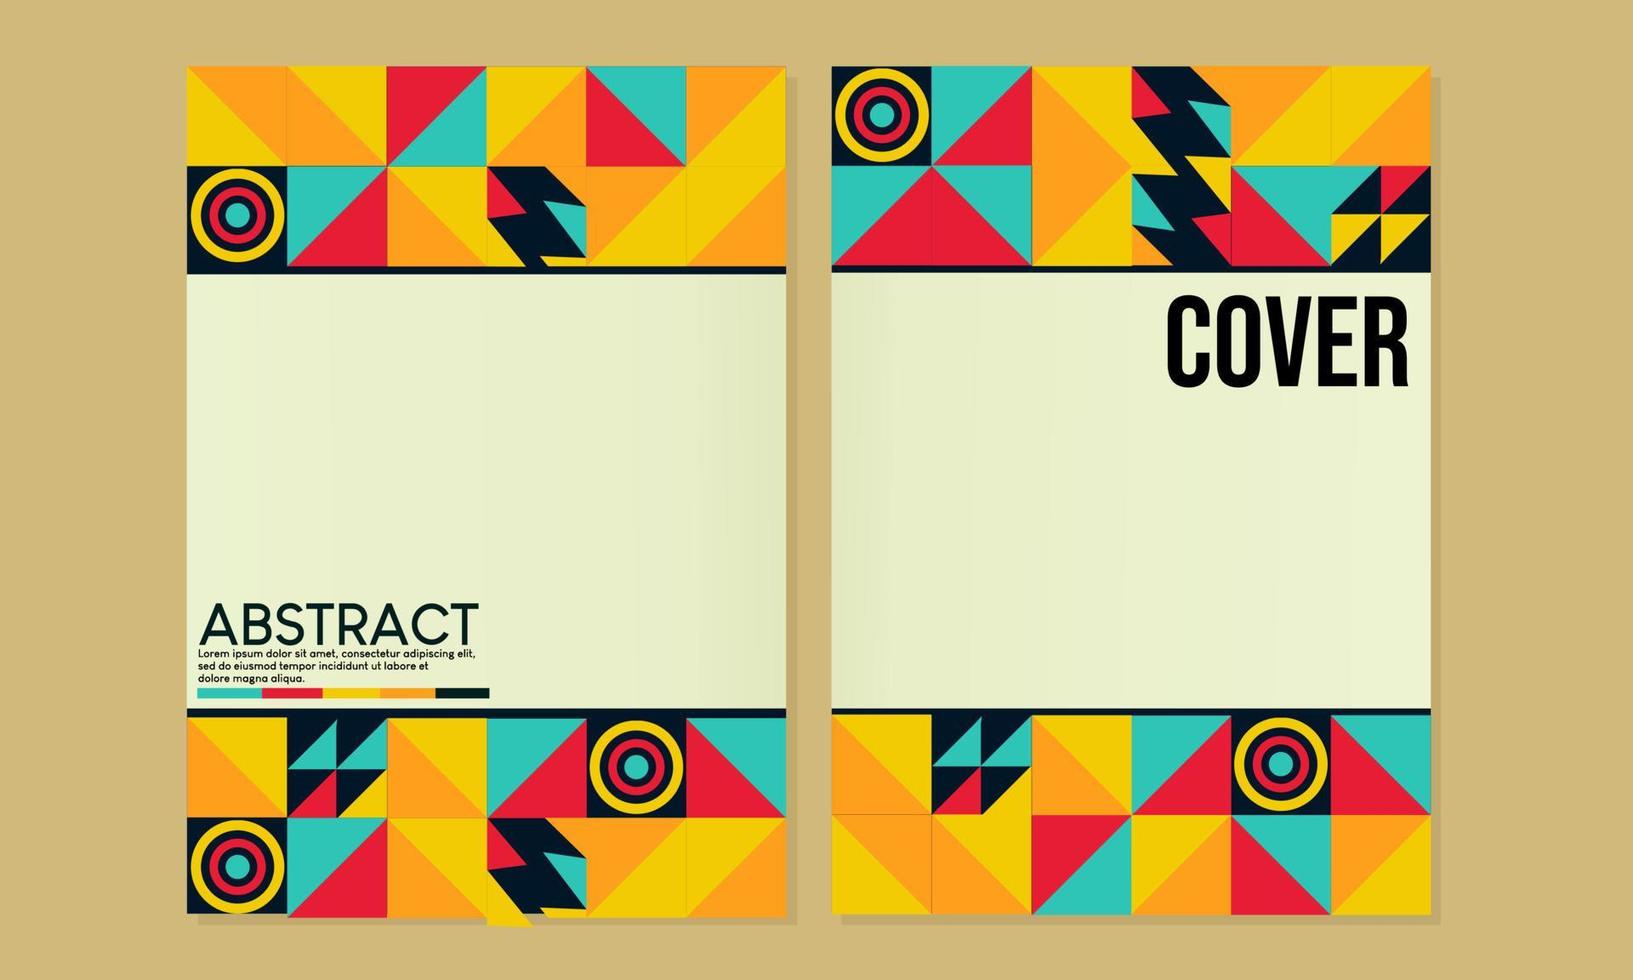 Poster templates set with abstract Geometric shapes, Retro, bauhaus, swiss geometric style design elements. for covers, banners,book,annual report, flyers and posters. vector